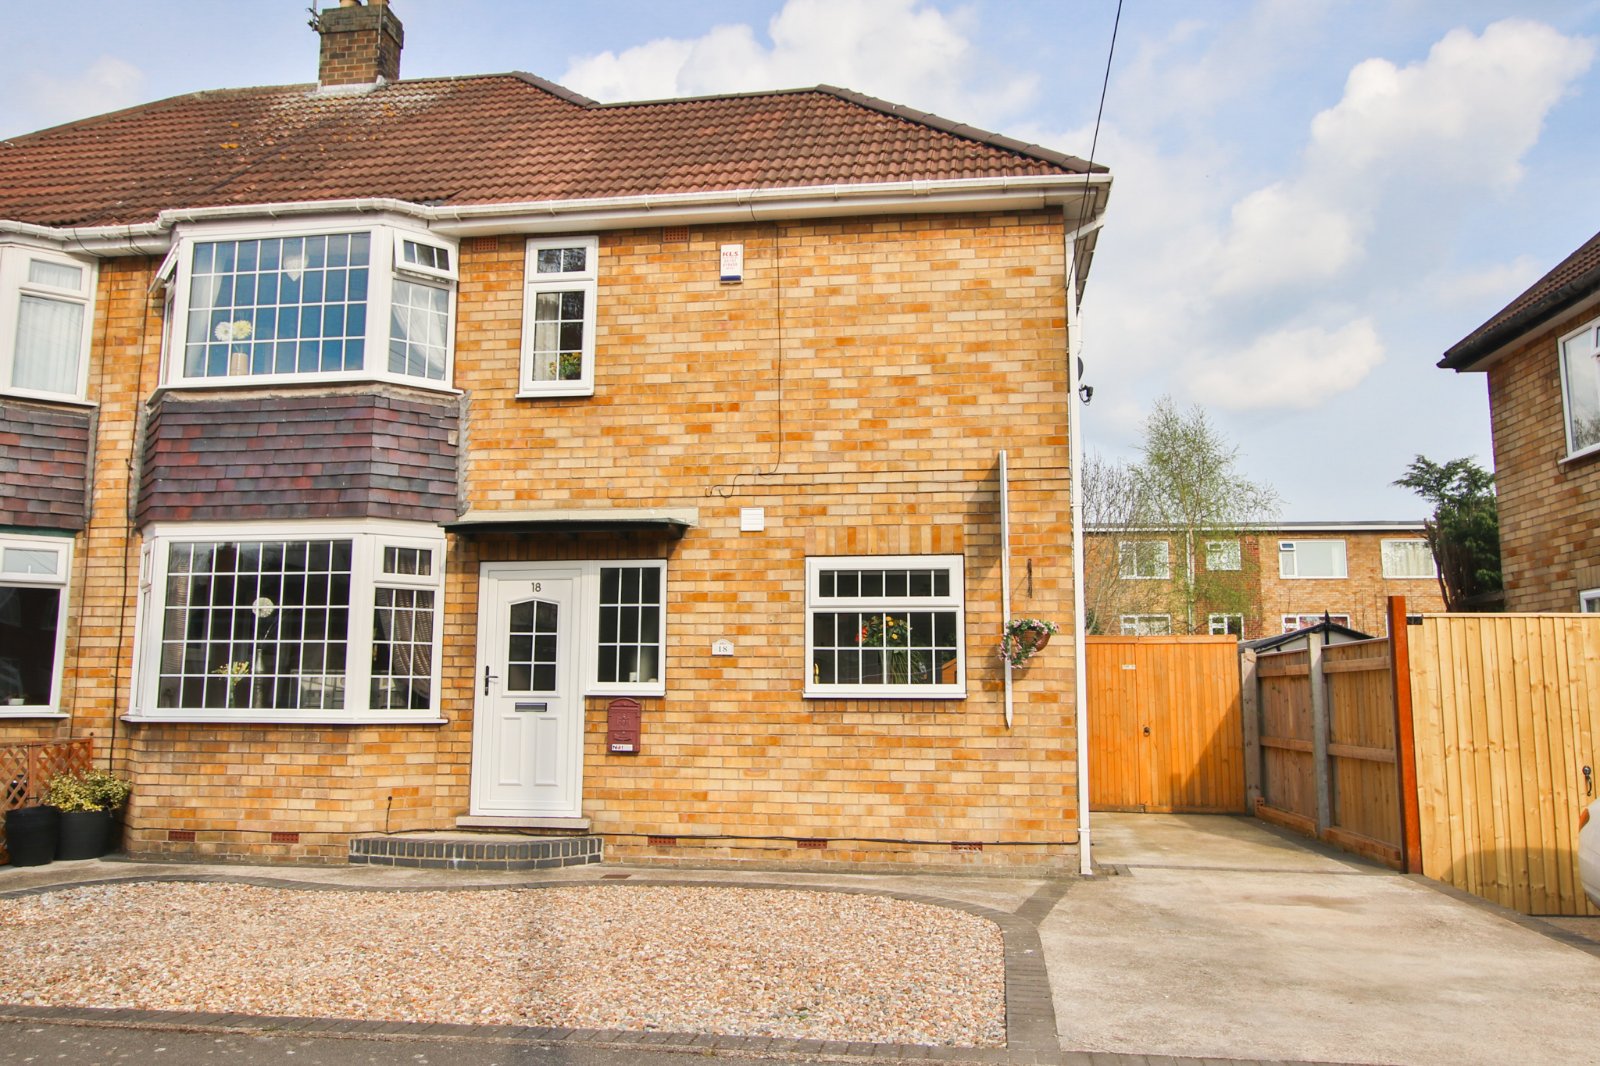 4 bed house for sale in Mill Beck Lane, Cottingham, HU16